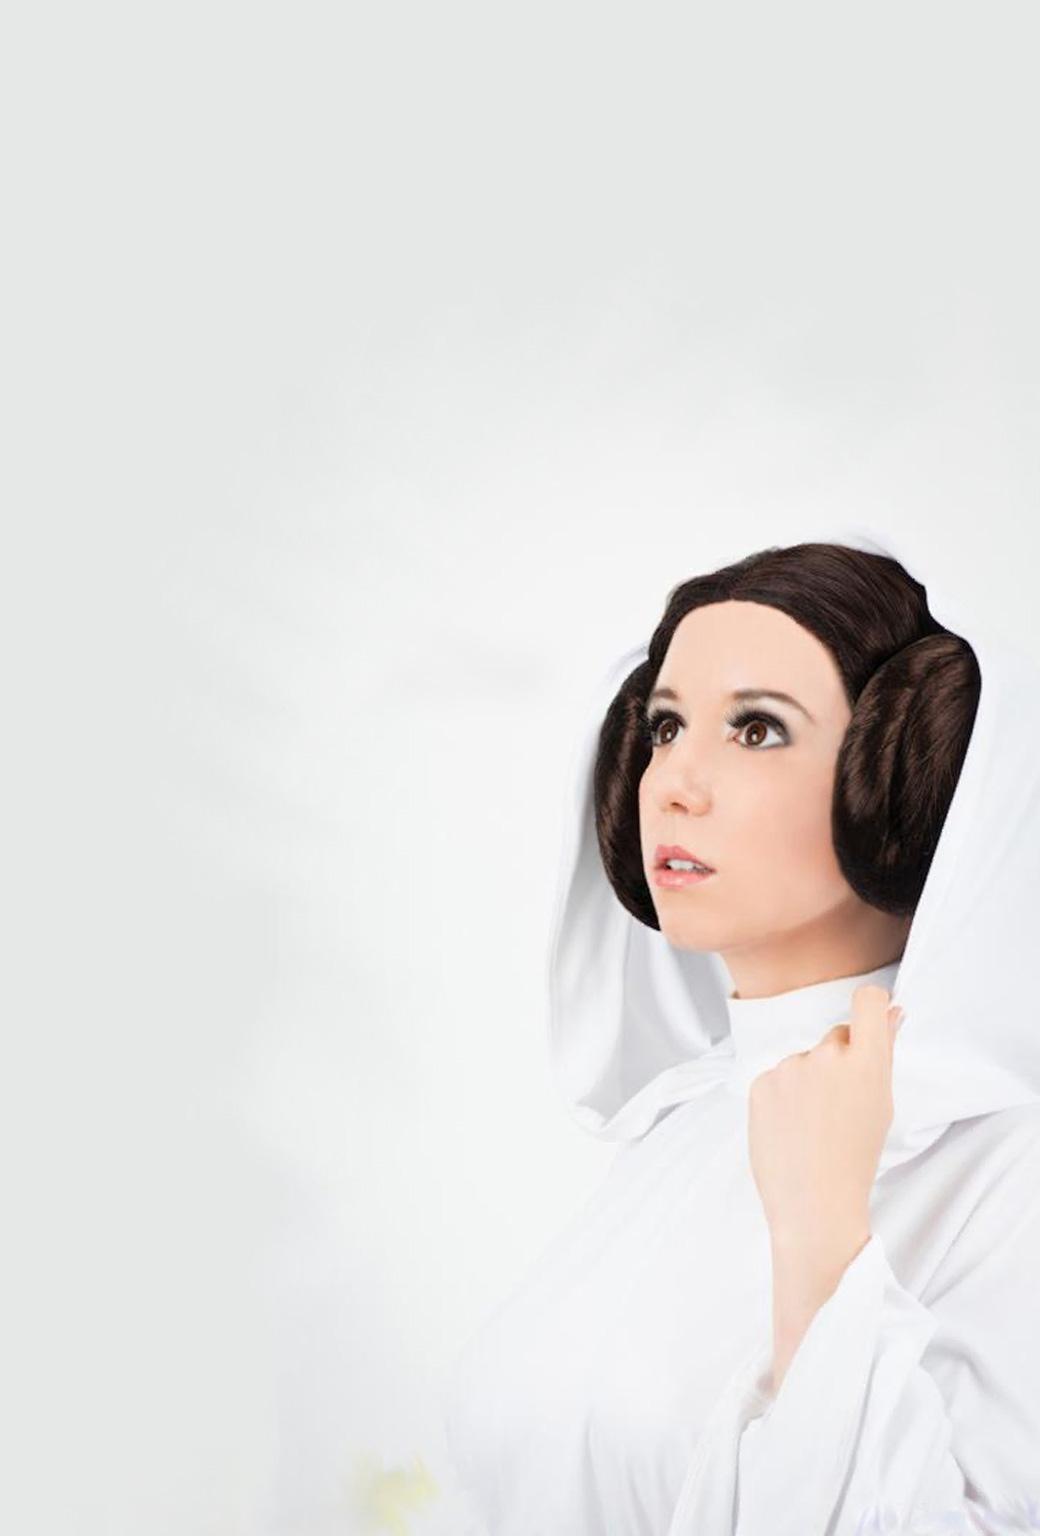 50 Princess Leia HD Wallpapers and Backgrounds